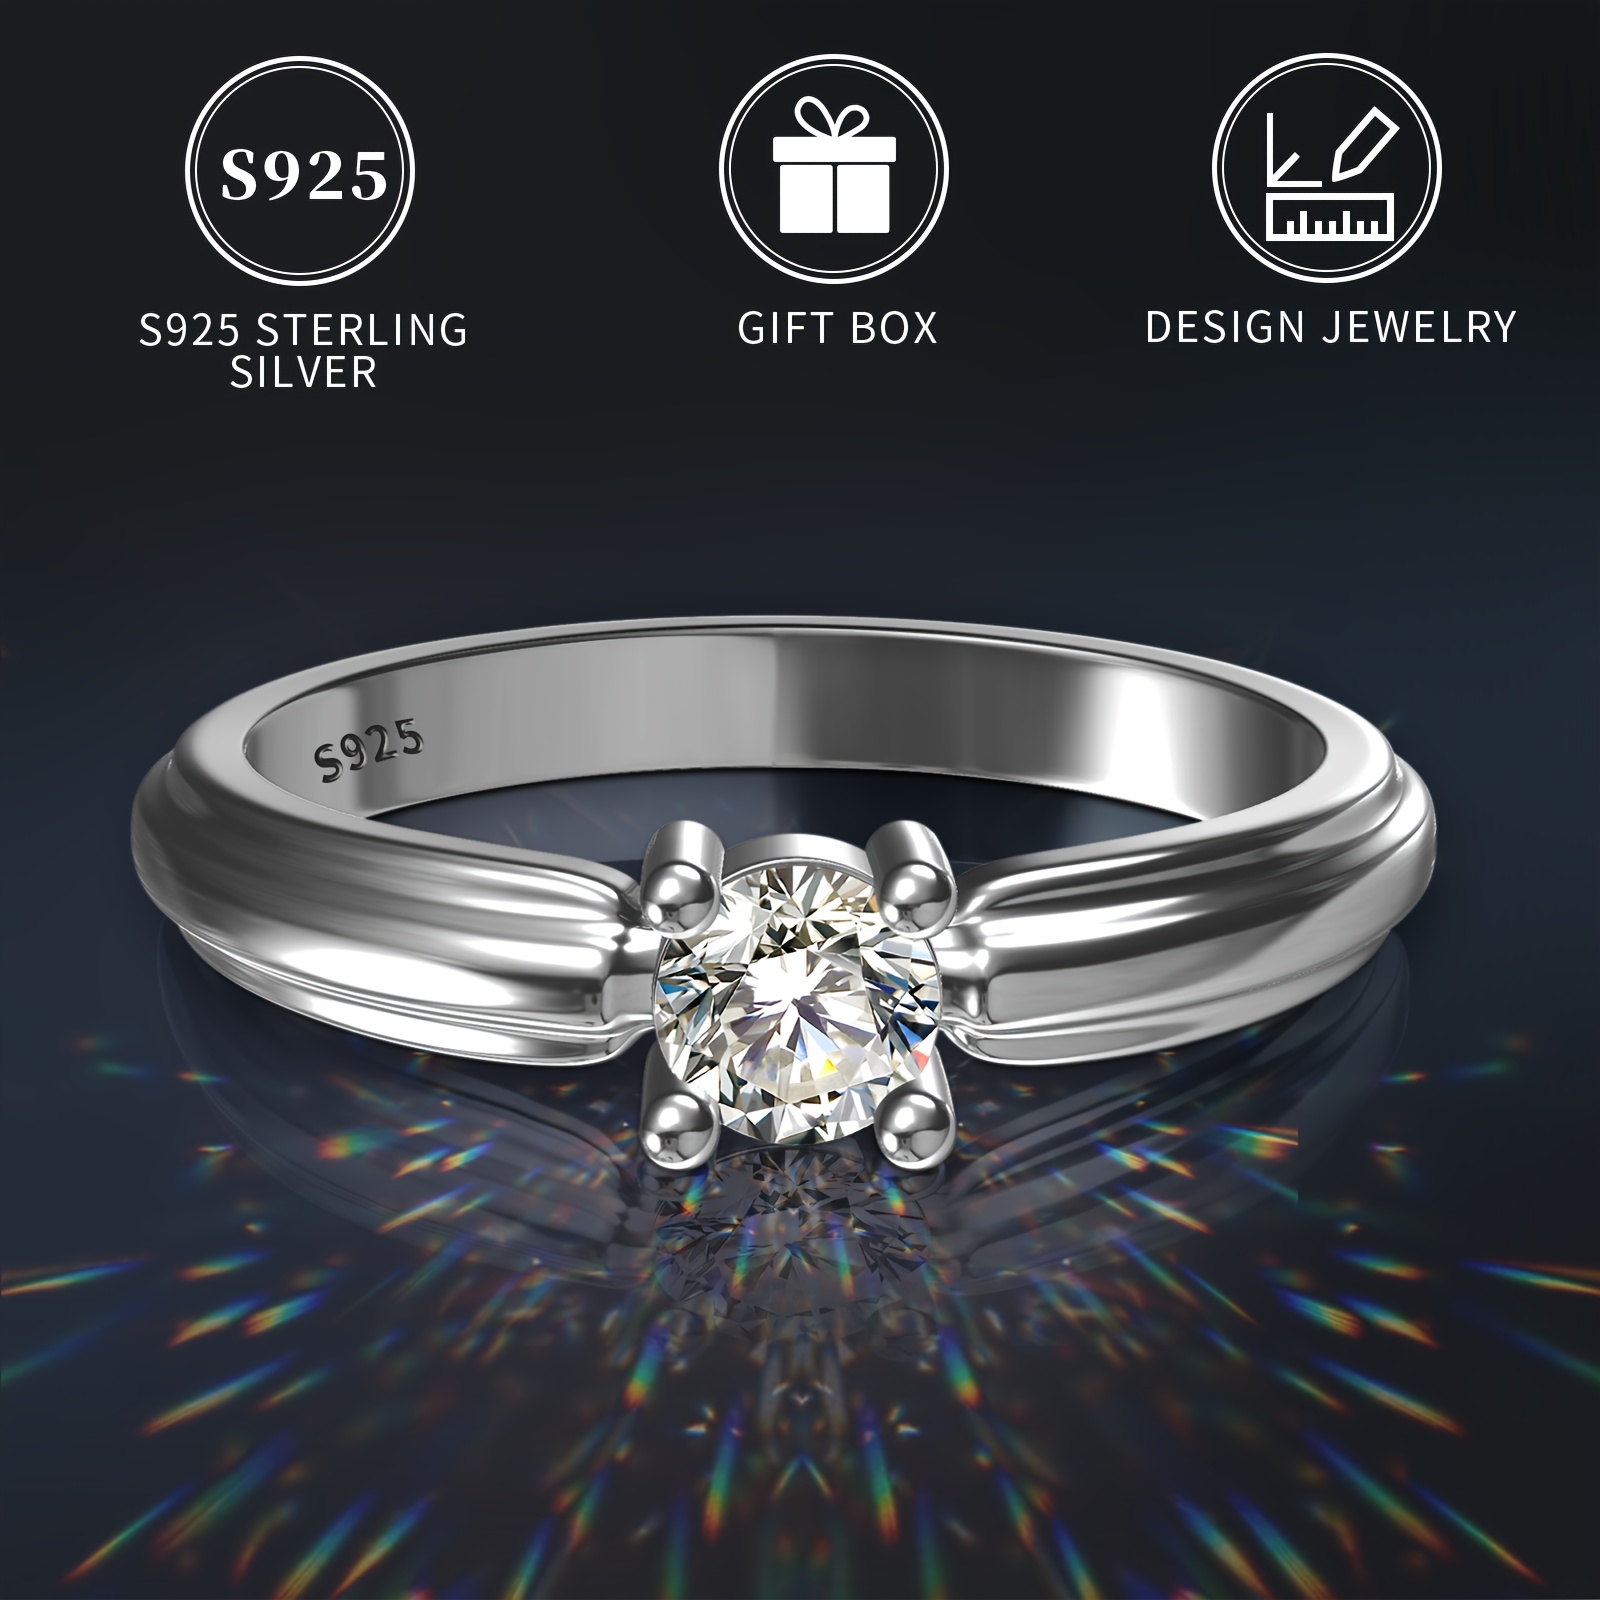 

925 Sterling Silver Solitaire Ring, Round 5a Cubic Zirconia, Solitaire Prong Setting, Elegant Classic Engagement Wedding Band, Daily Party Jewelry With Gift Box, Bling Style Gifts For Women